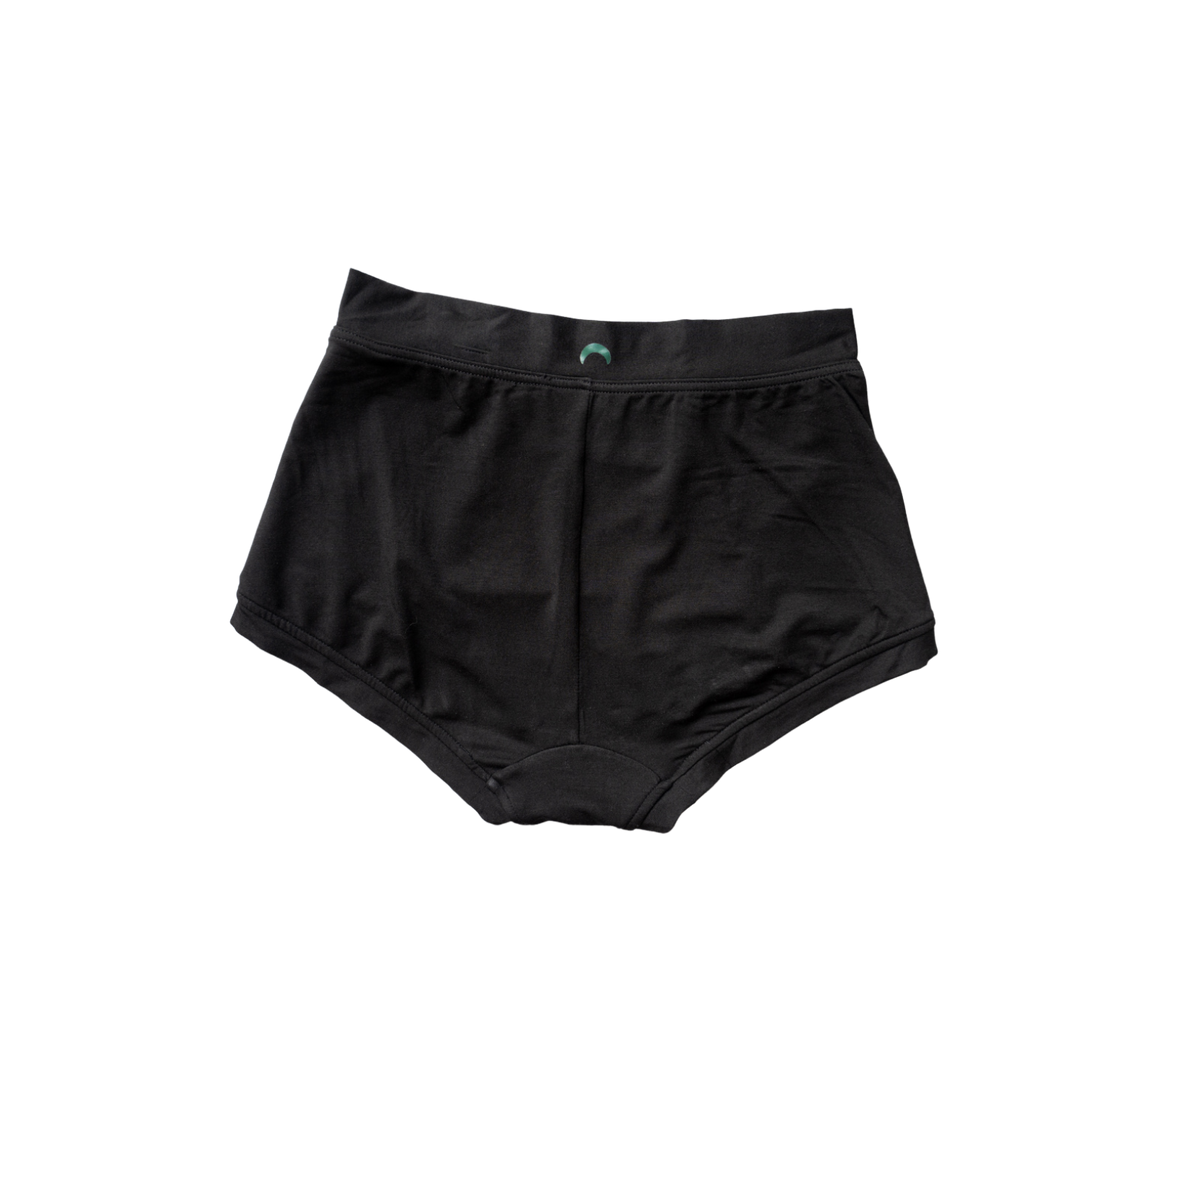 Huha Brief Underwear – S.O.S Save Our Soles